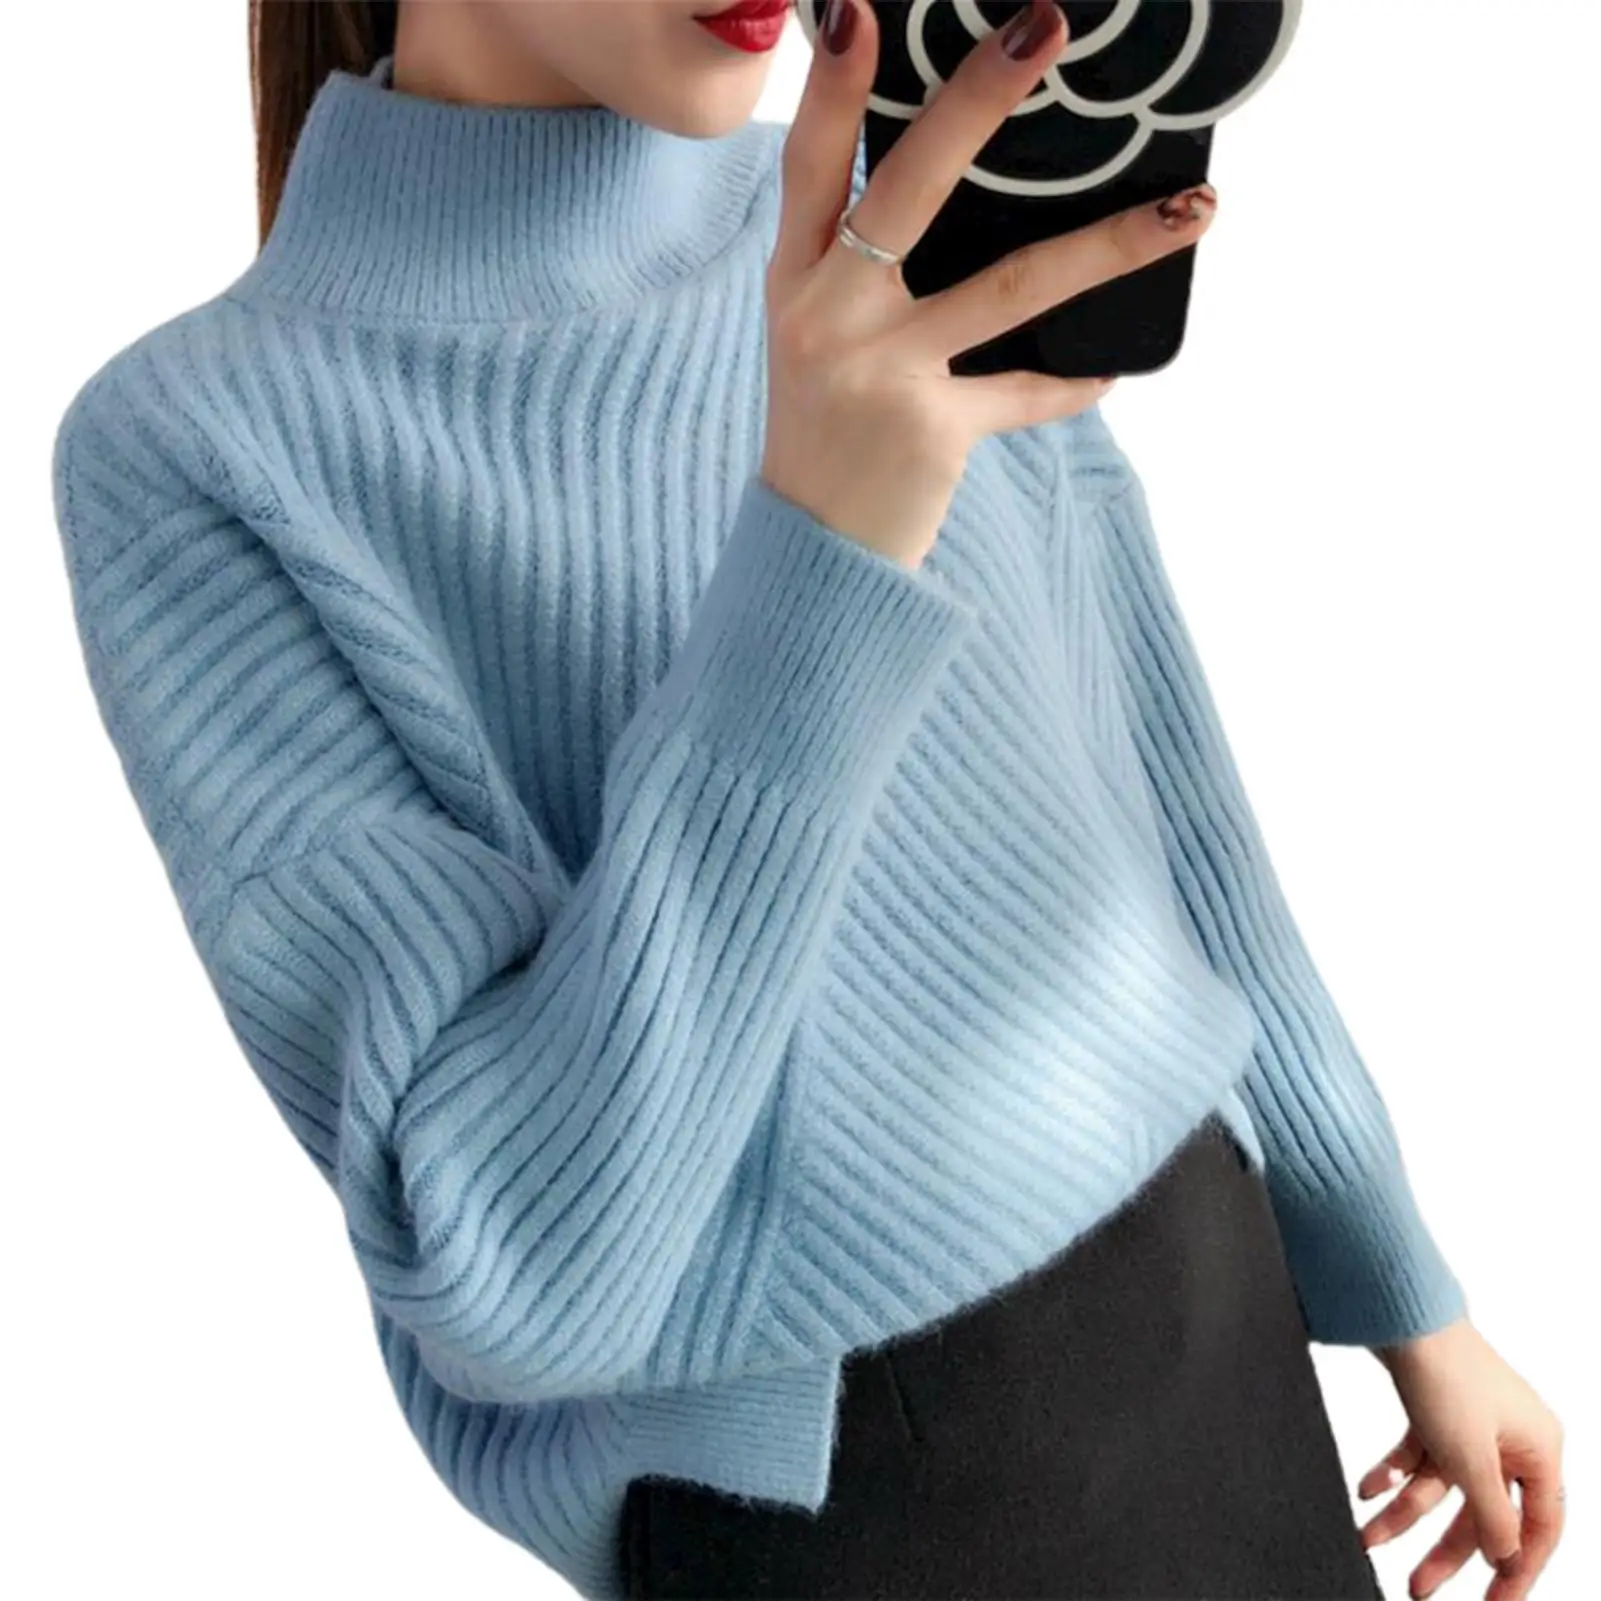 

2020 Women Autumn Long Sleeve Sweater Fashion Mock Neck Sweater Solid Stripe Rib Winter Pullover Sexy Tops Cotton Female Jumper-